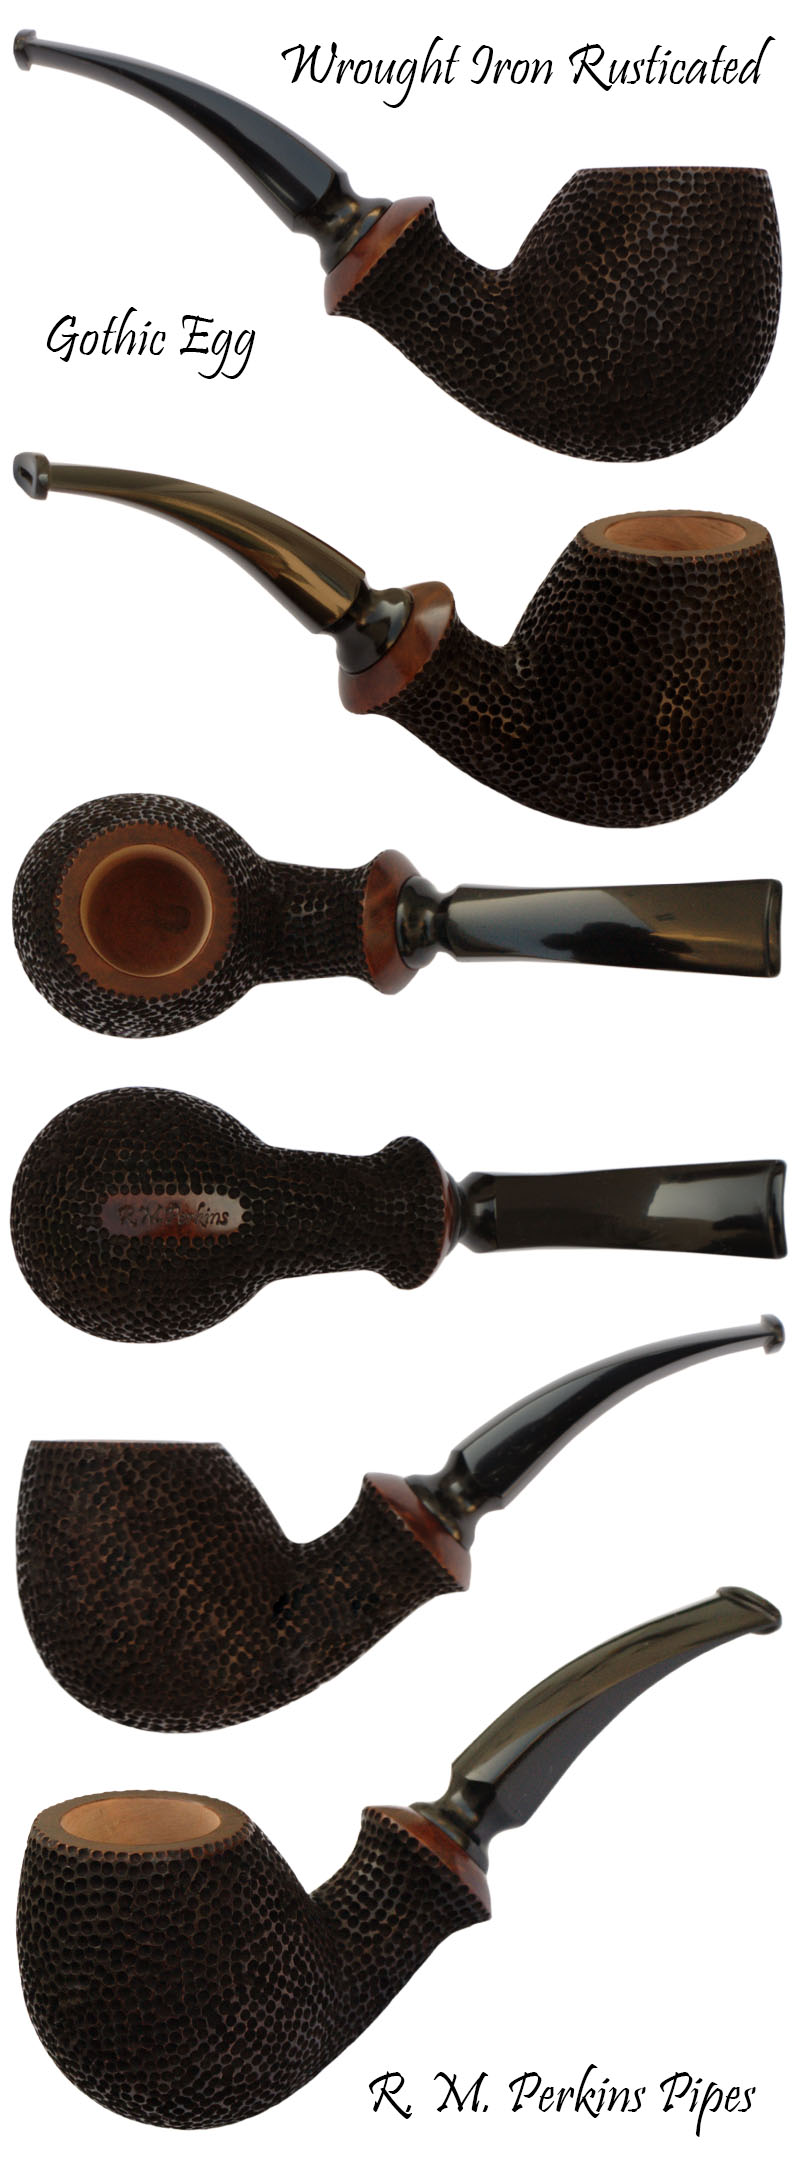 Wrought Iron Rusticated Gothic Egg Smoking Pipe